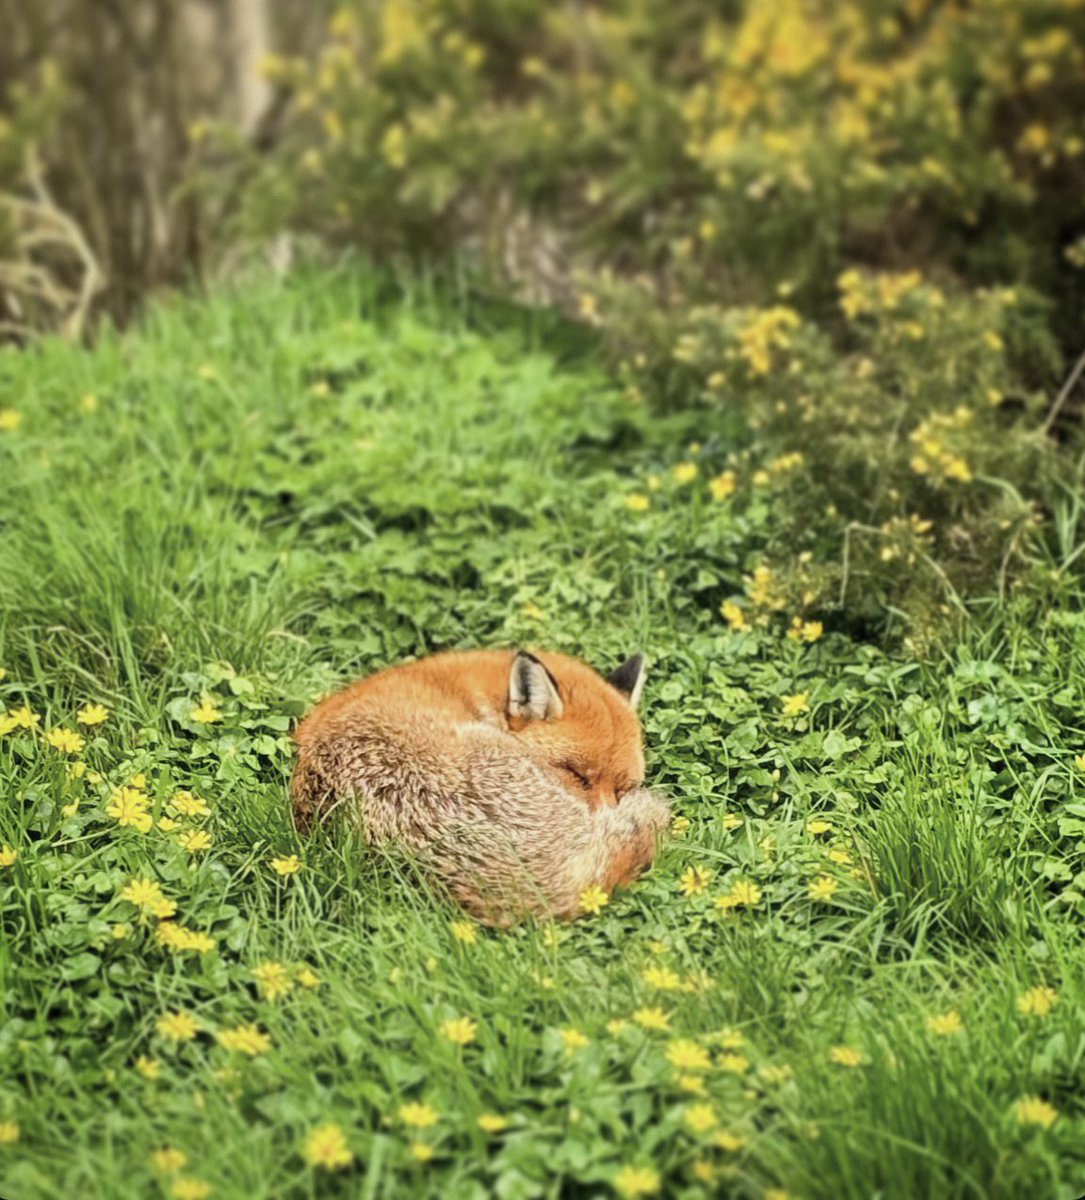 A moment of contentment , shared by @sarahlucy123 for your #FoxOfTheDay